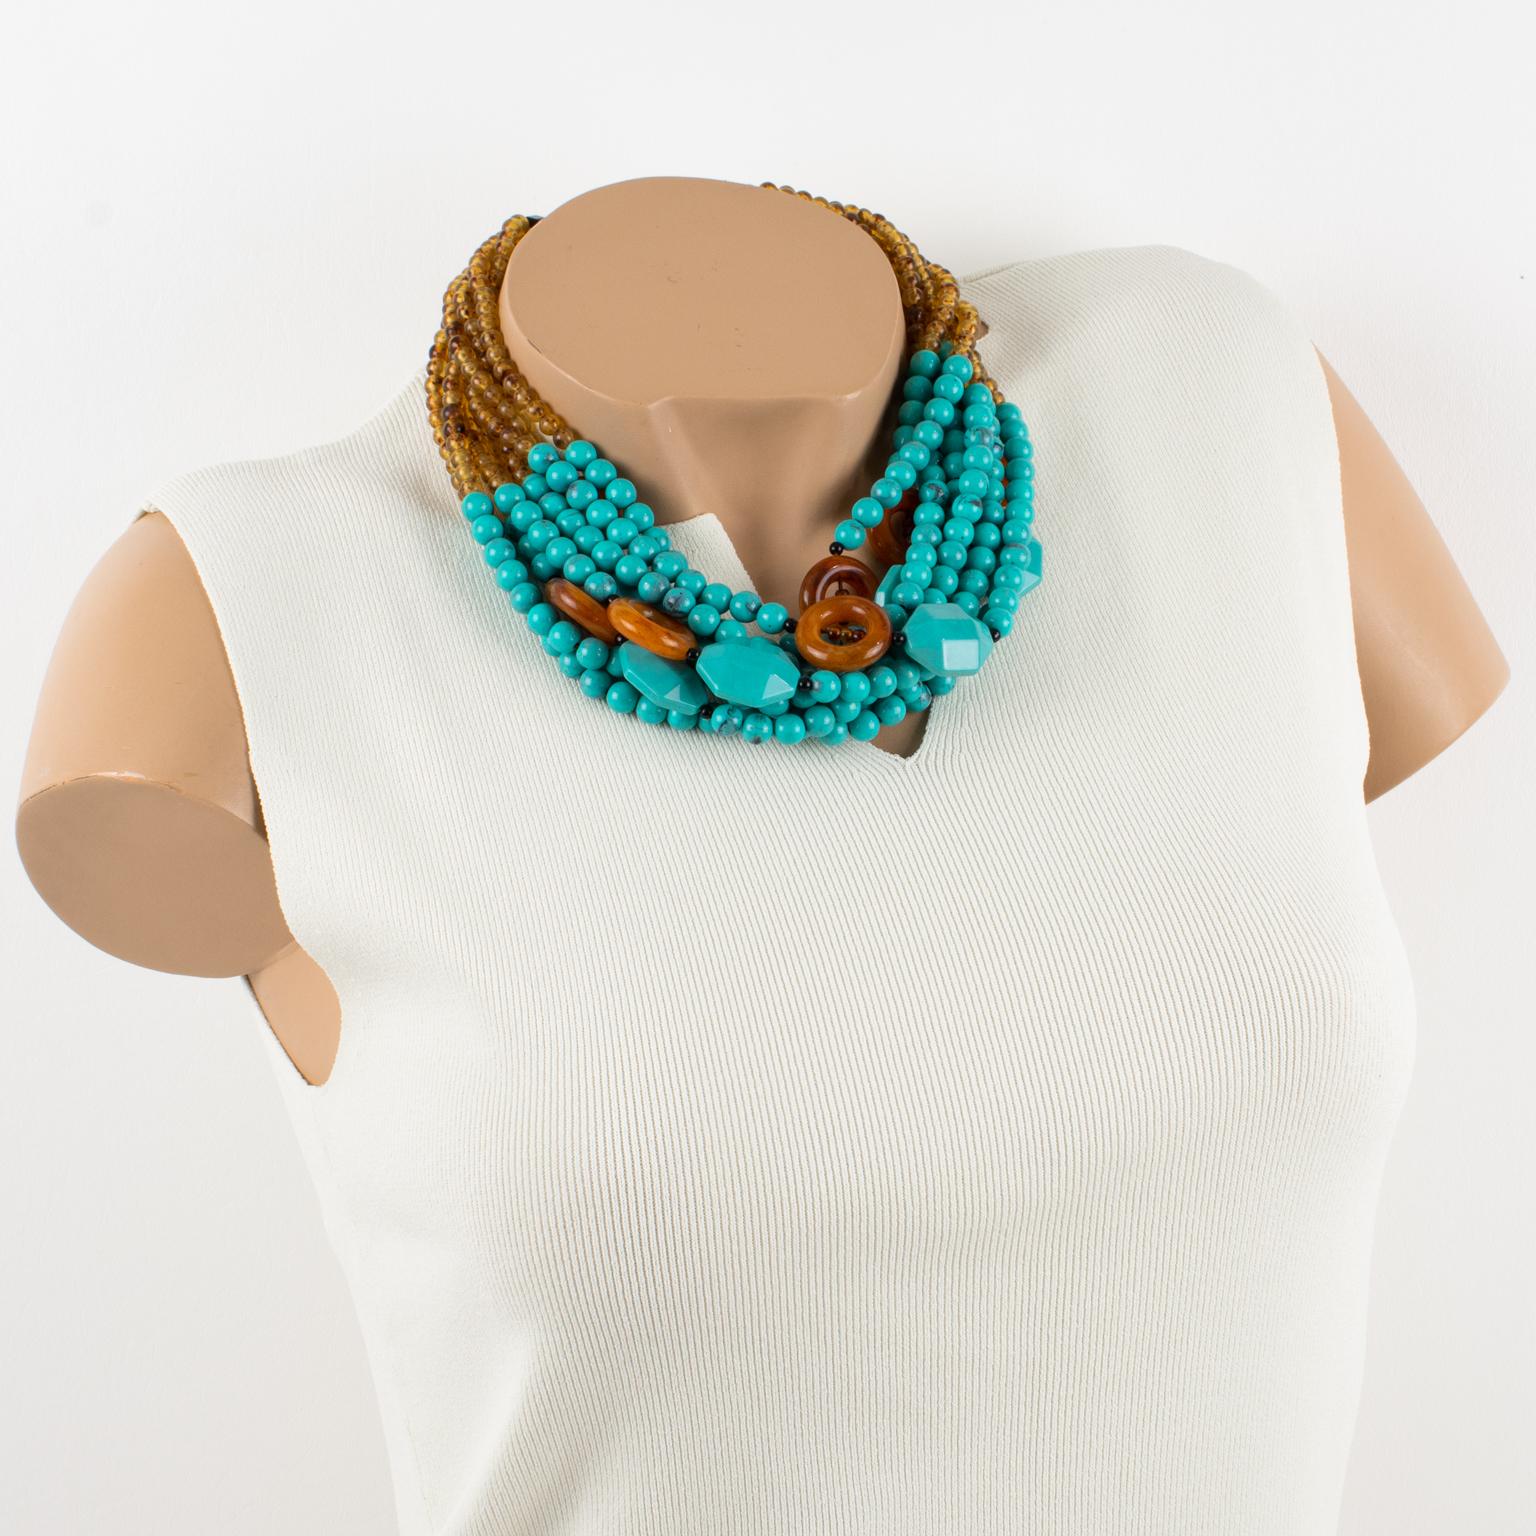 Angela Caputi made this elegant resin-beaded choker necklace in Italy. It features an oversized multi-strand design with a dominant turquoise color contrasted with rootbeer brown donut elements and tiny amber-like seed beads. Her assortment of